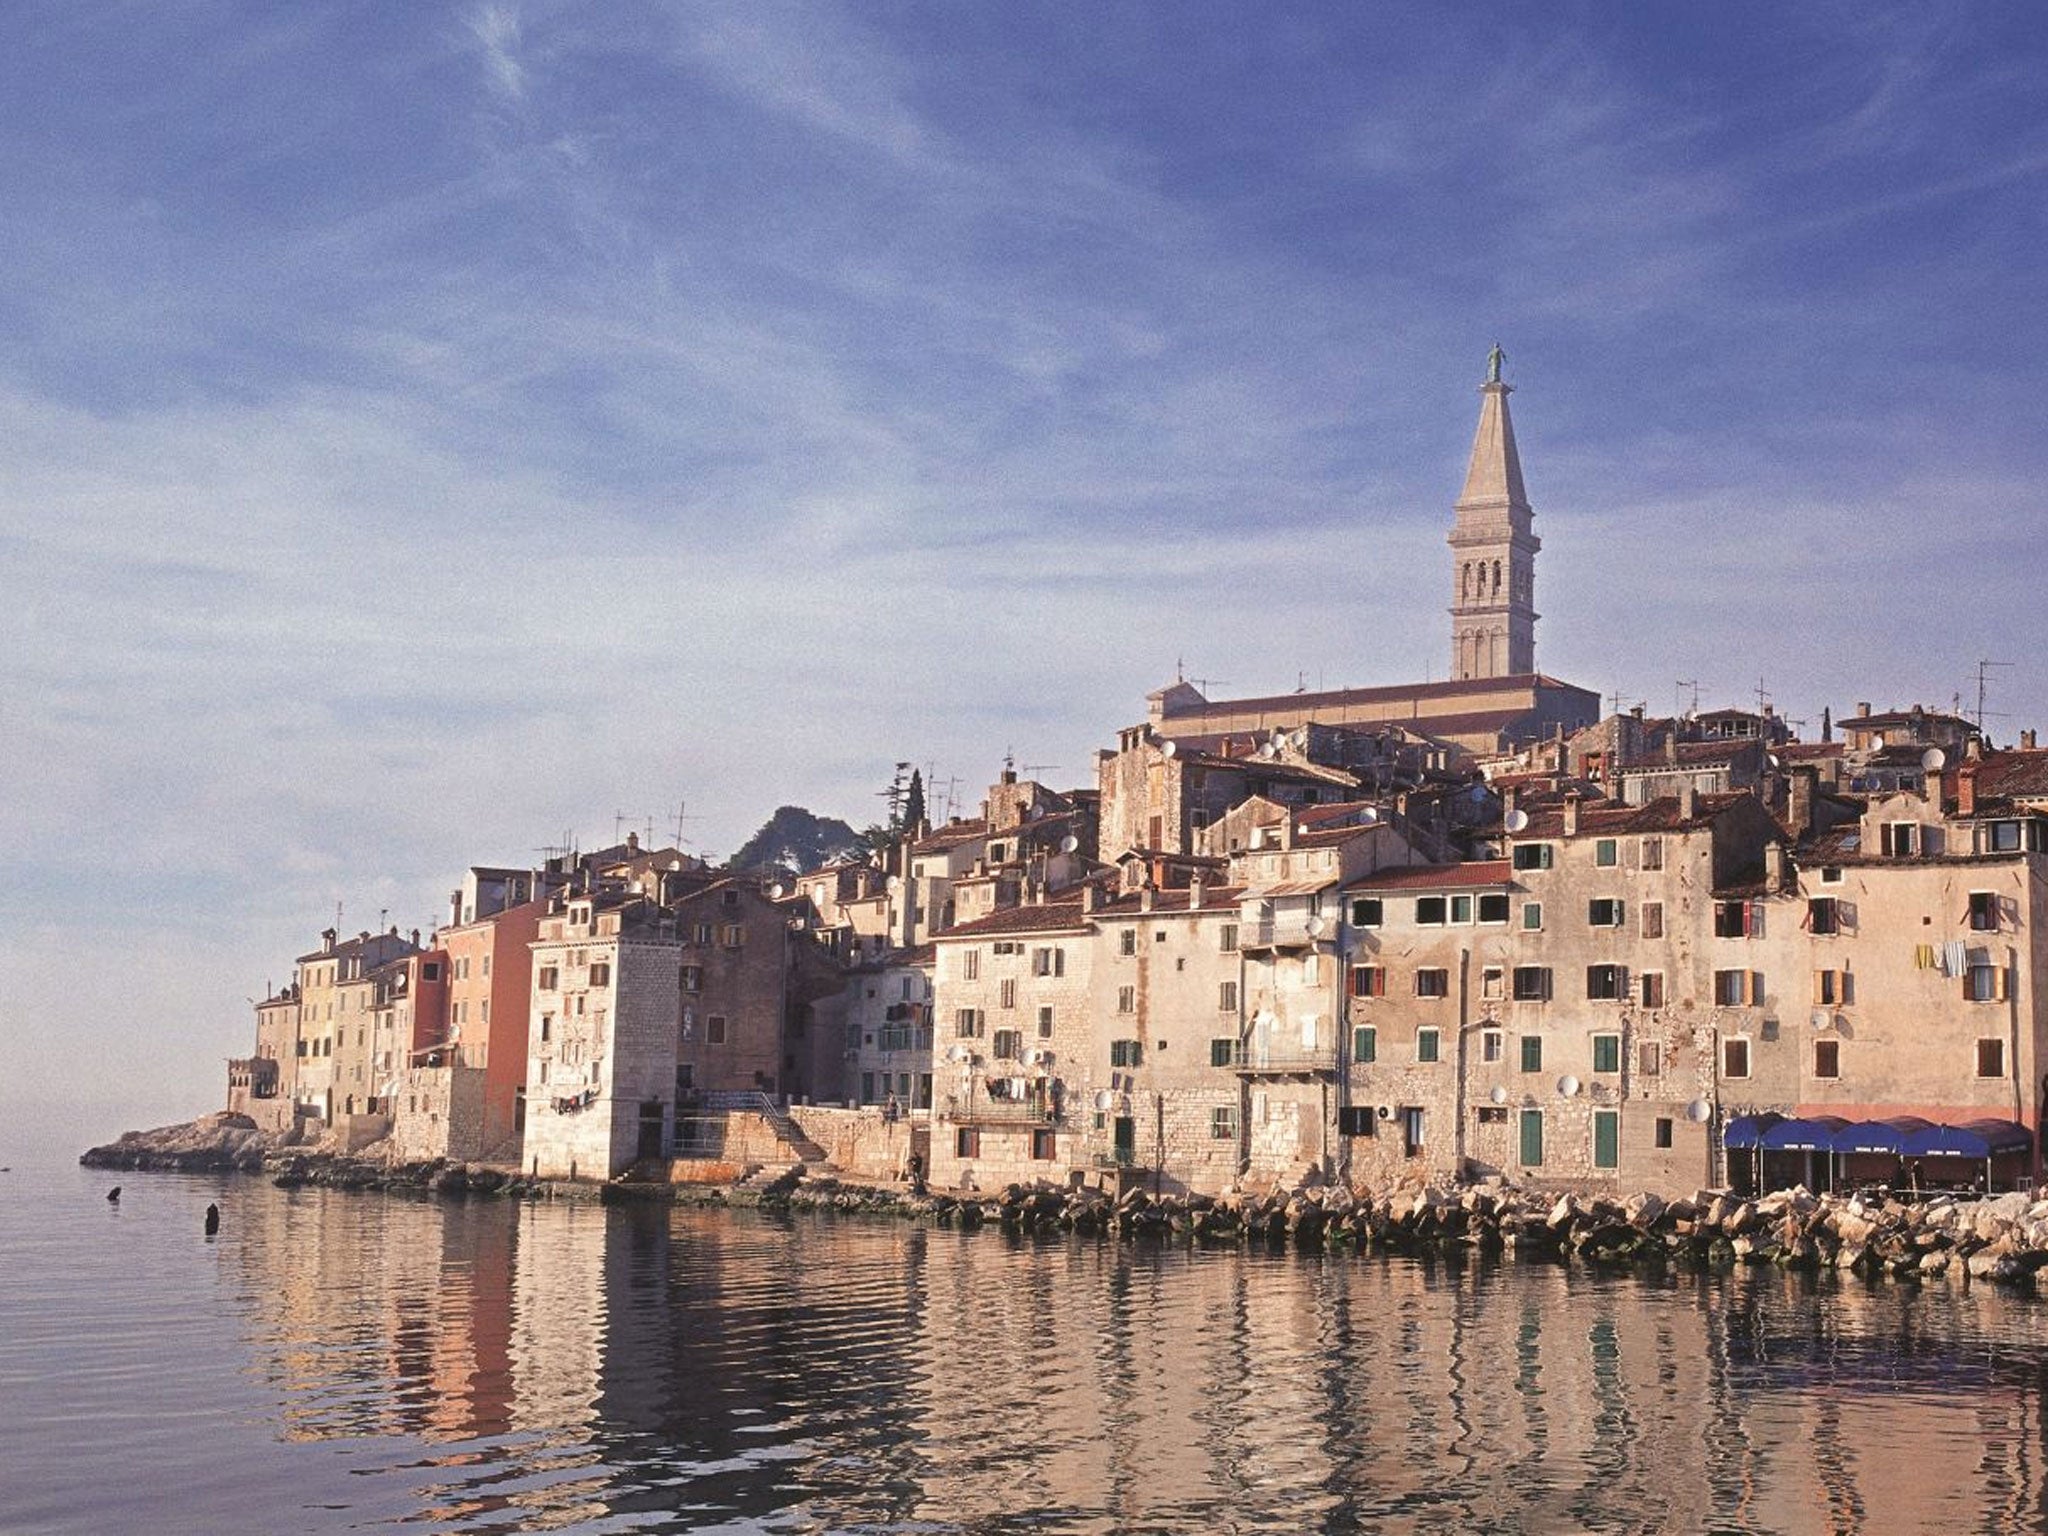 Hater born: The city of Rovinj has harboured creative types since the Second World War